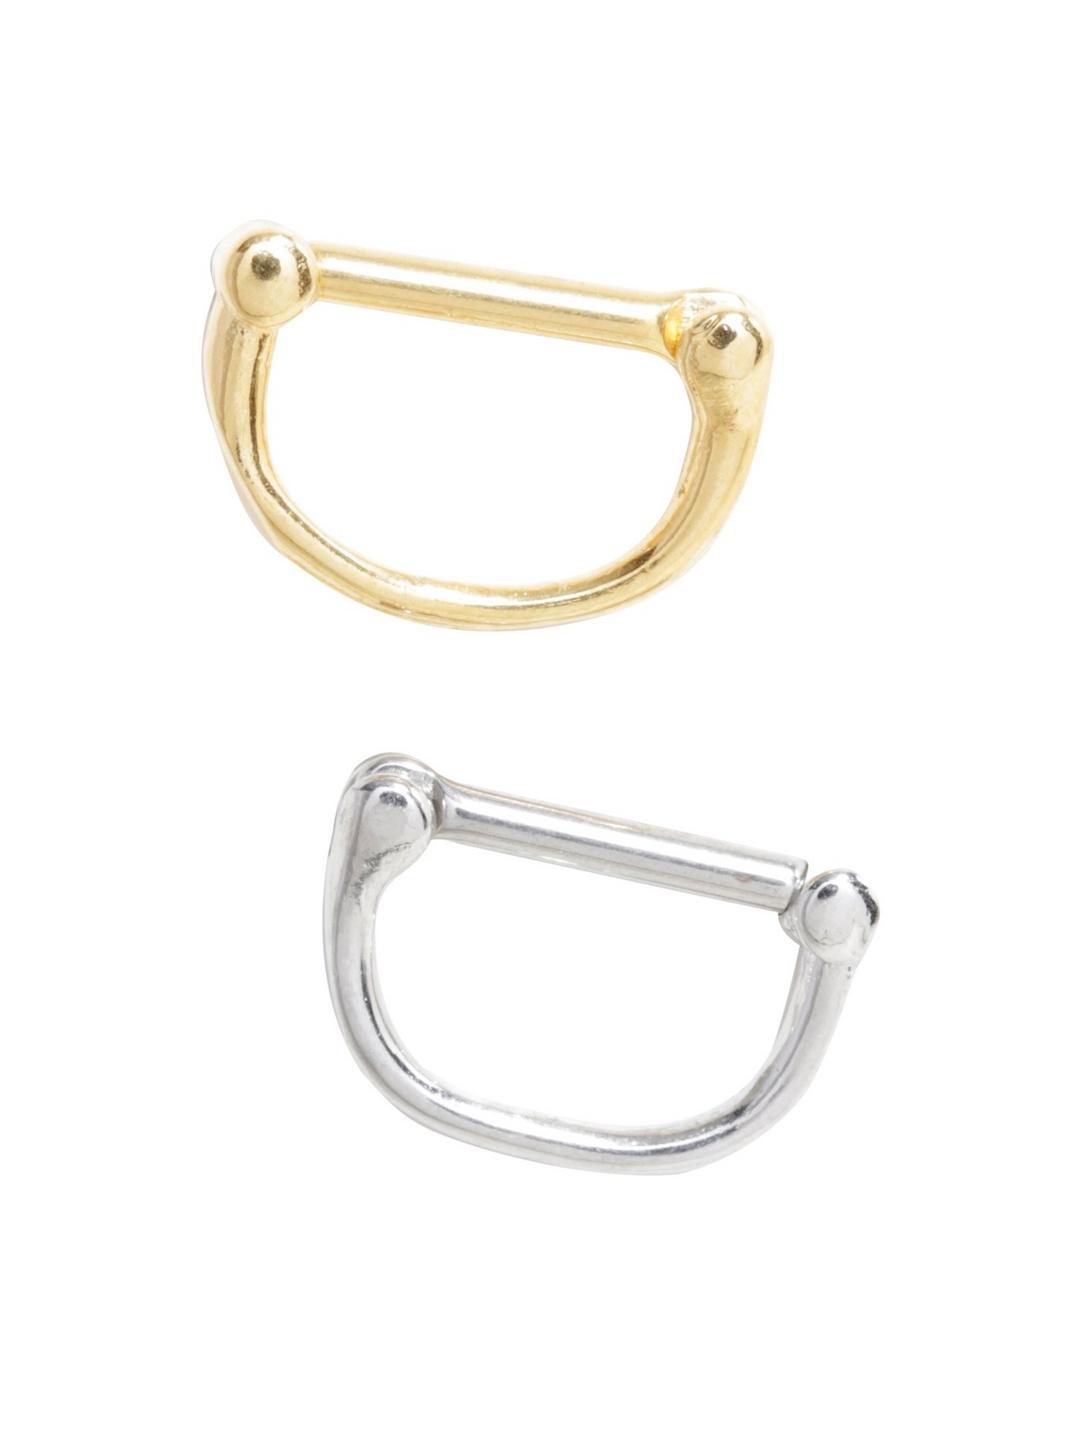 Steel Silver & Gold Small Septum Clicker 2 Pack, MULTI, hi-res